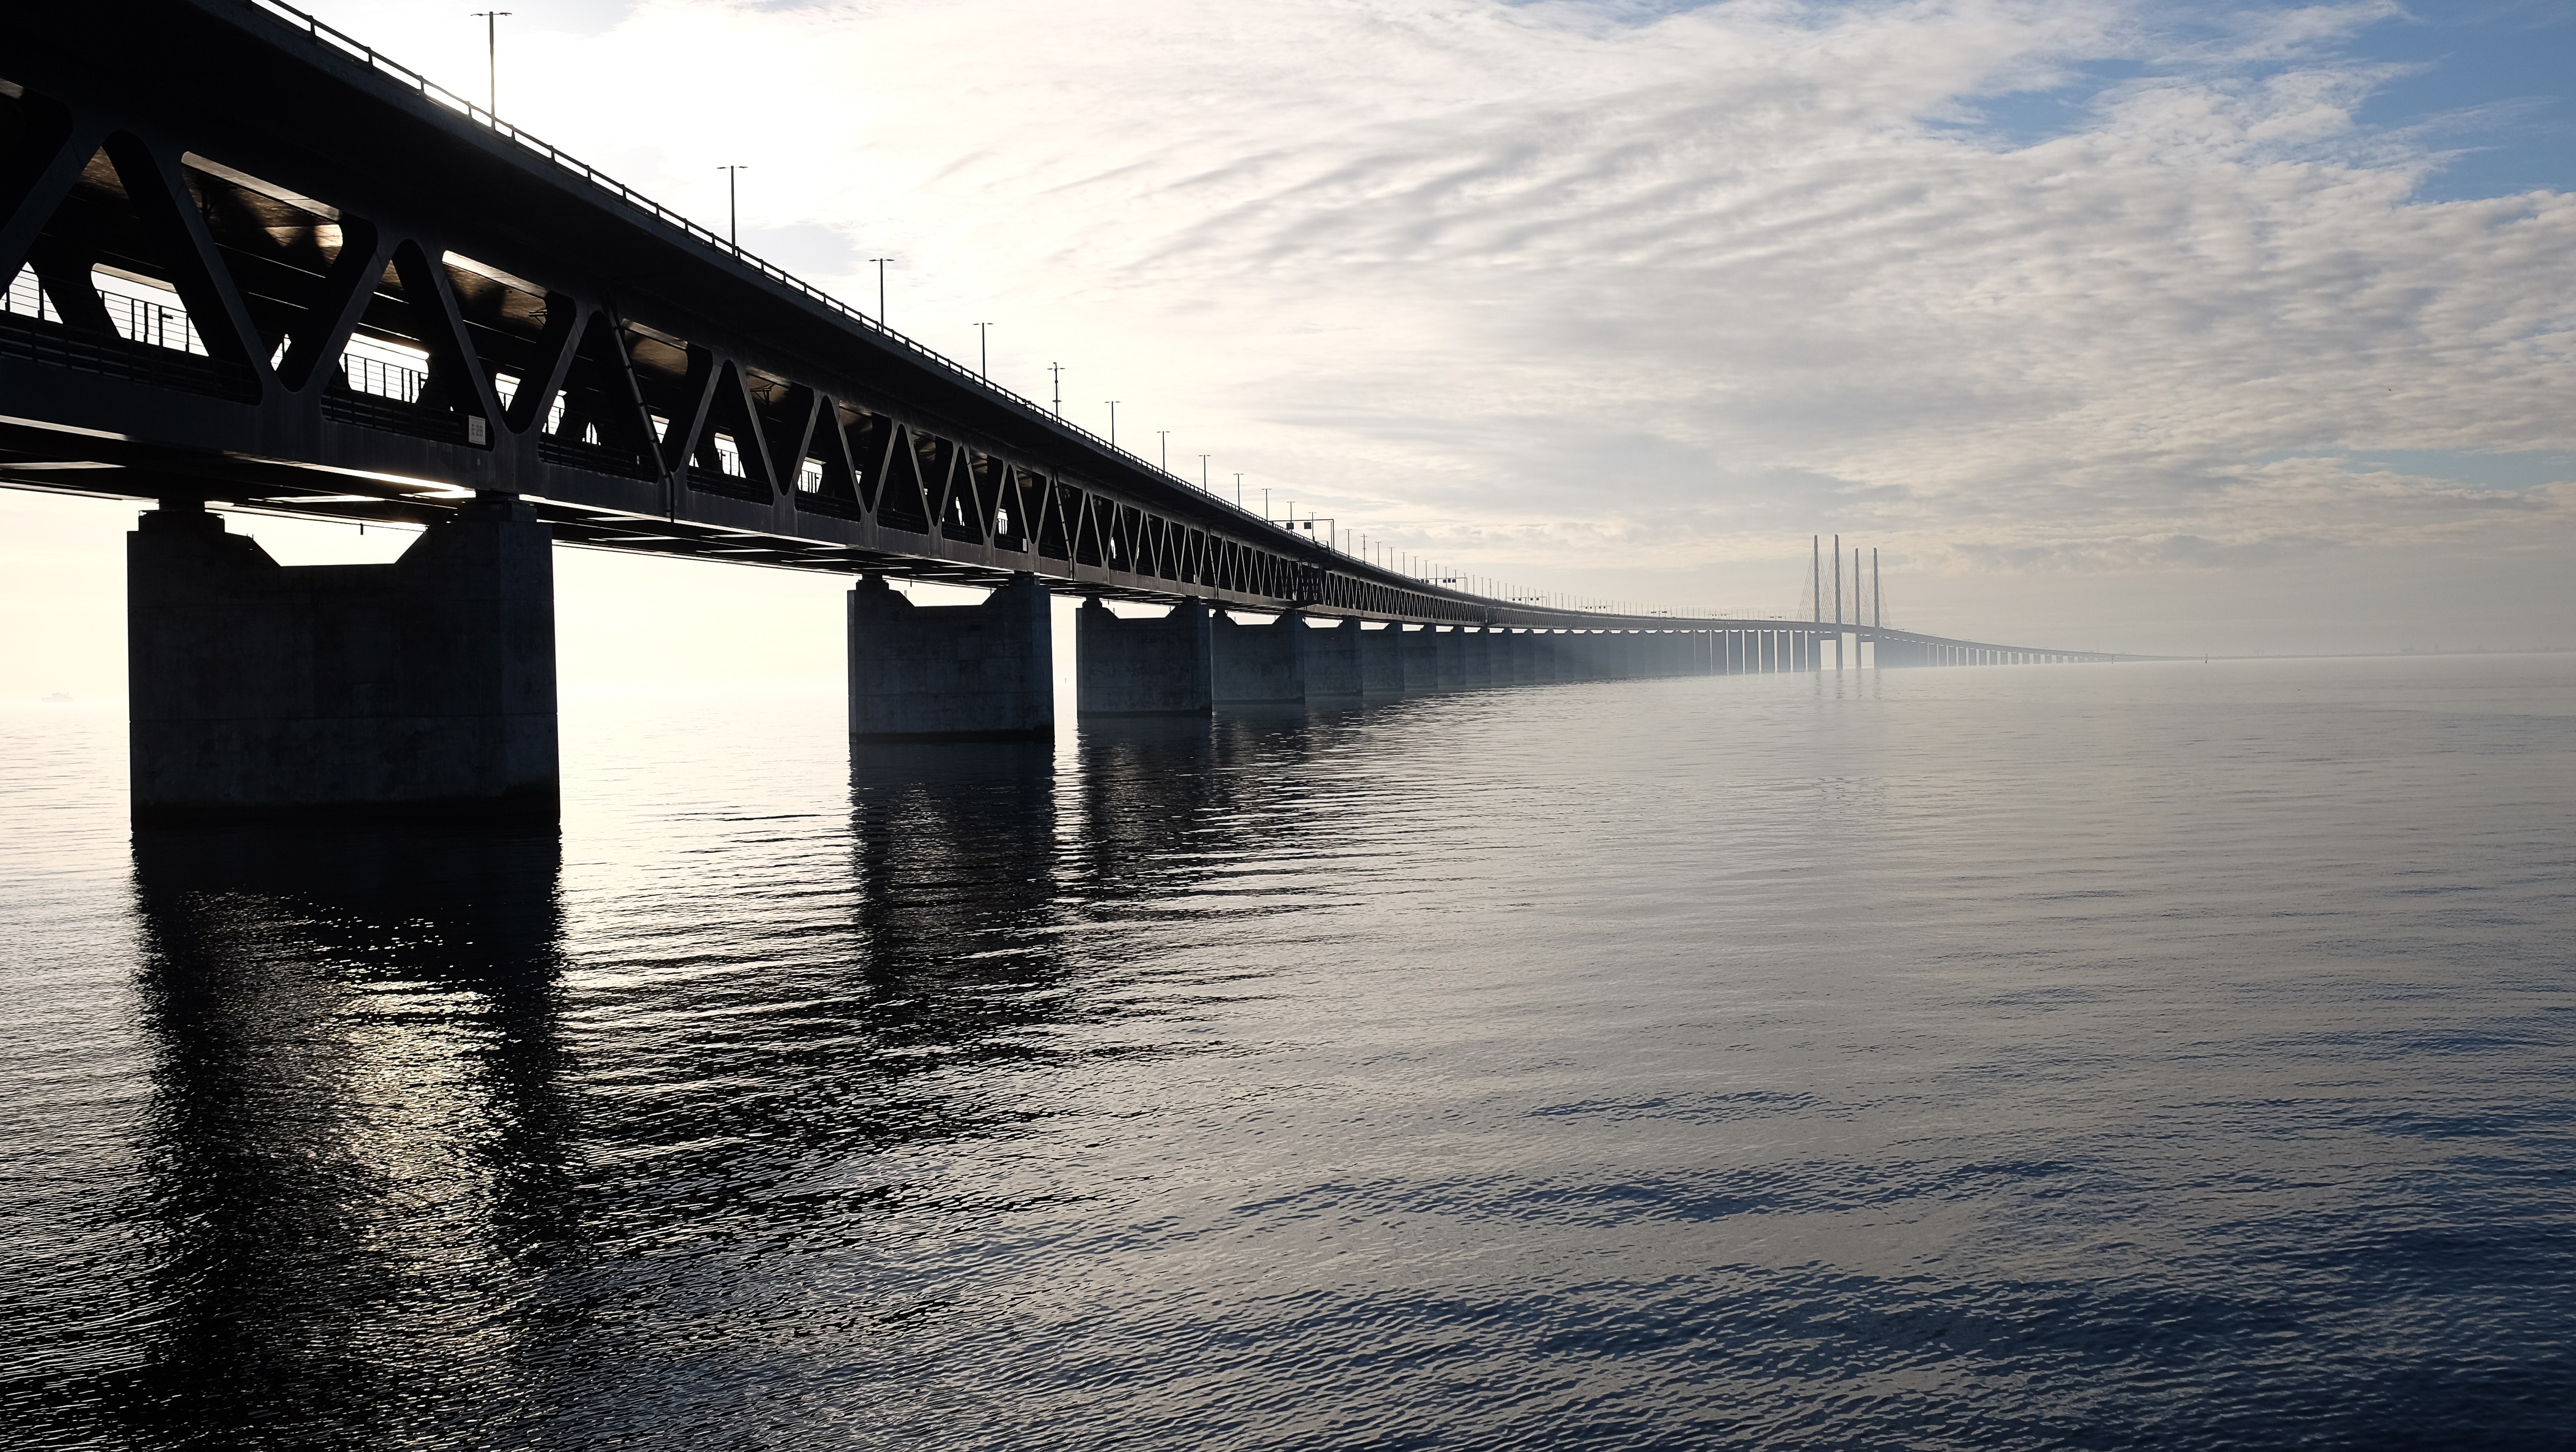 Grey concrete bridge on body of water under blue and white sky during daytime photo